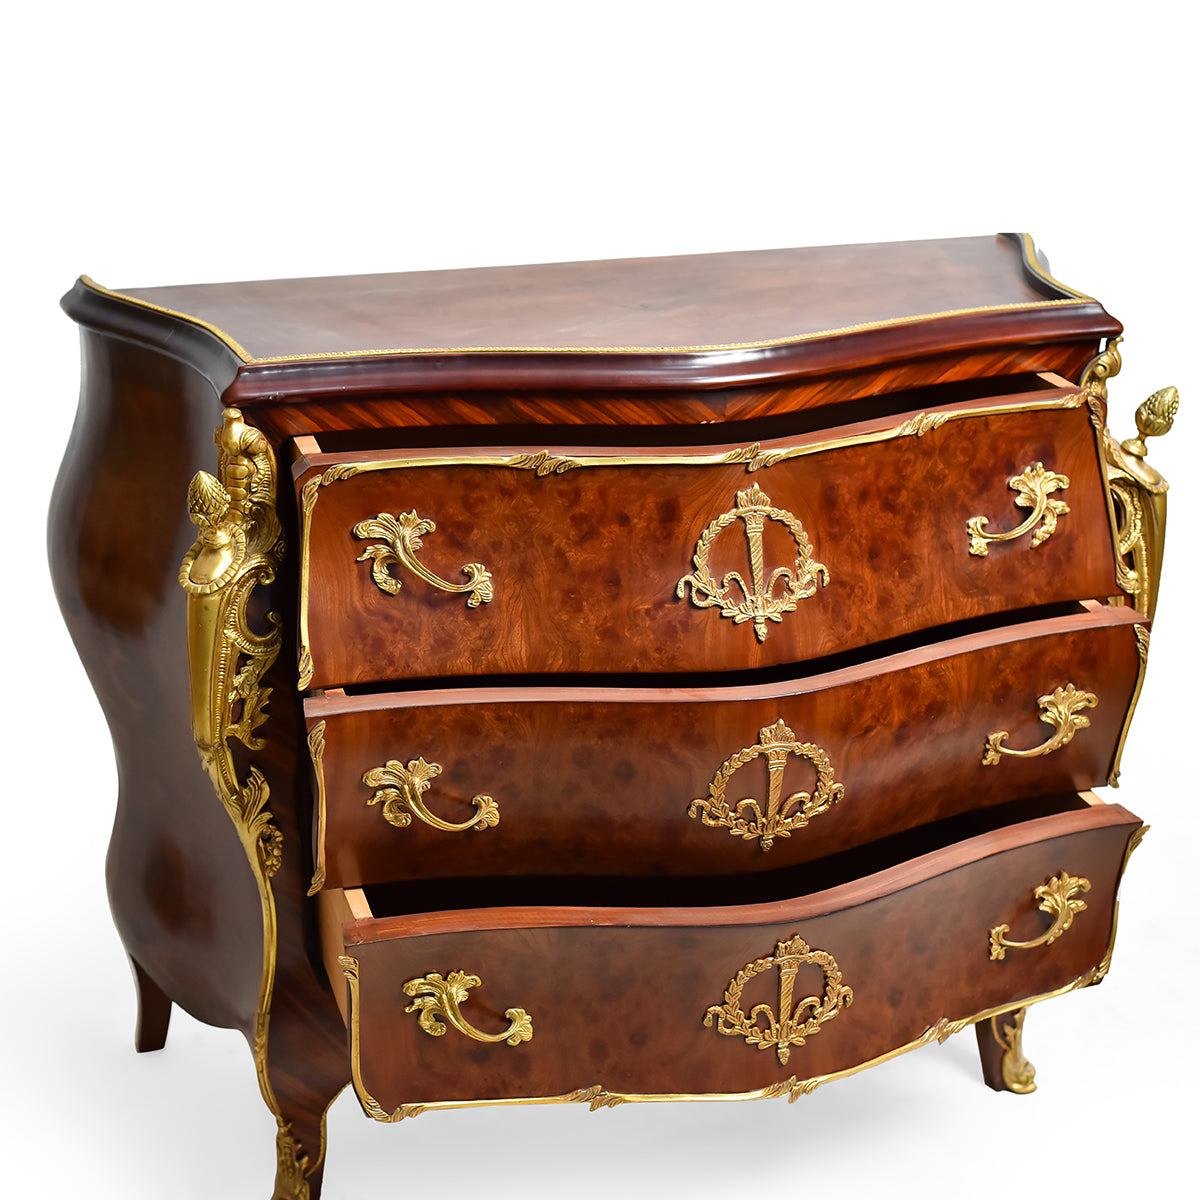 Régence French style commode